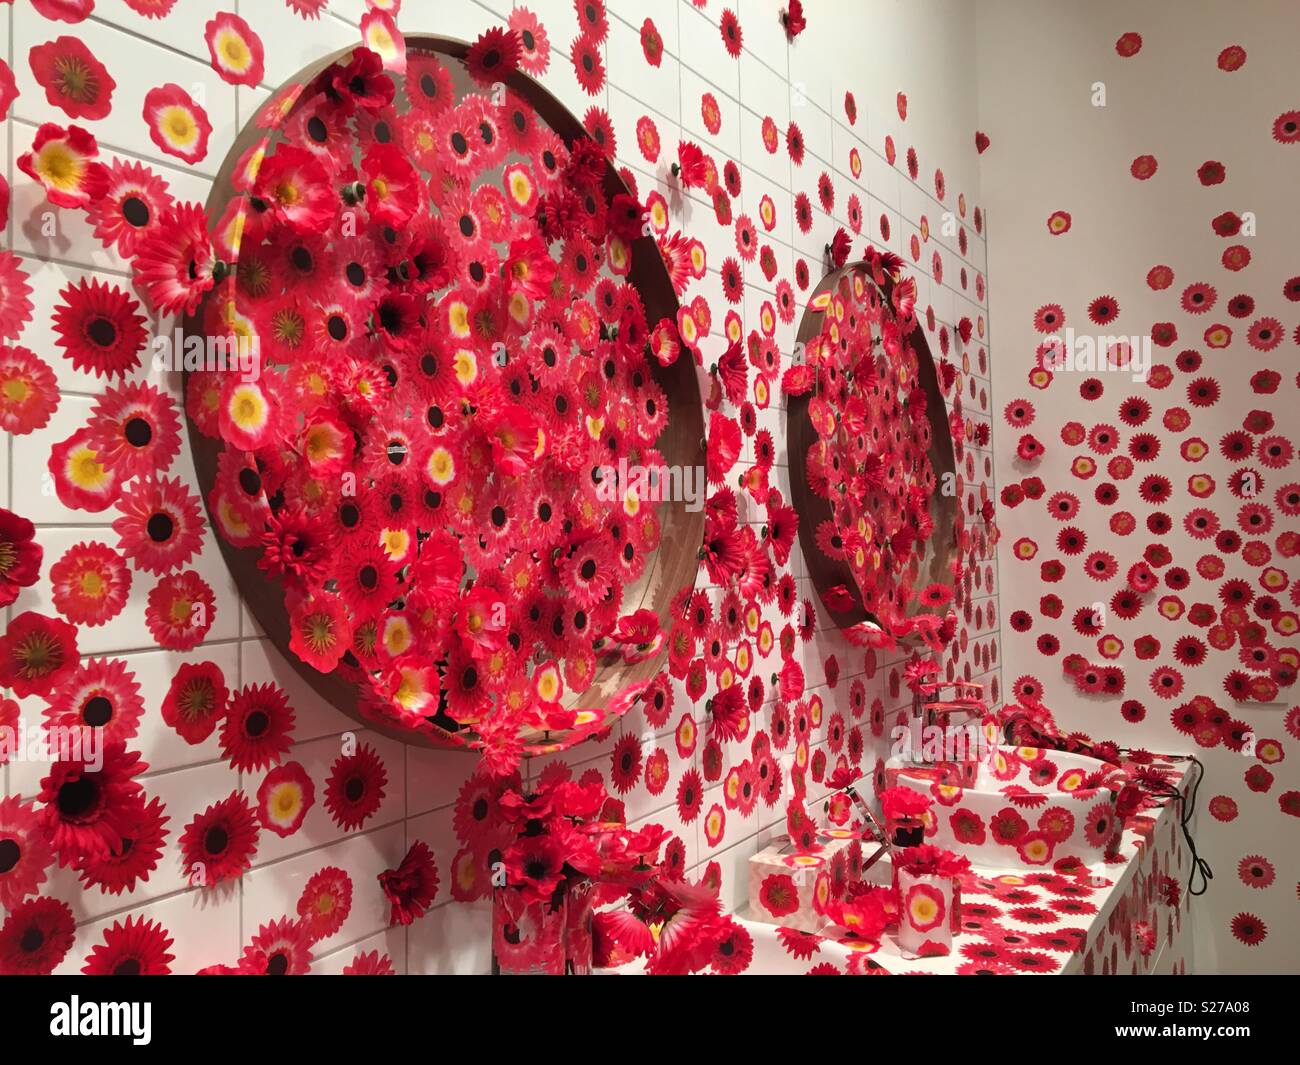 Flower stickers in a bathroom as an art installation Stock Photo